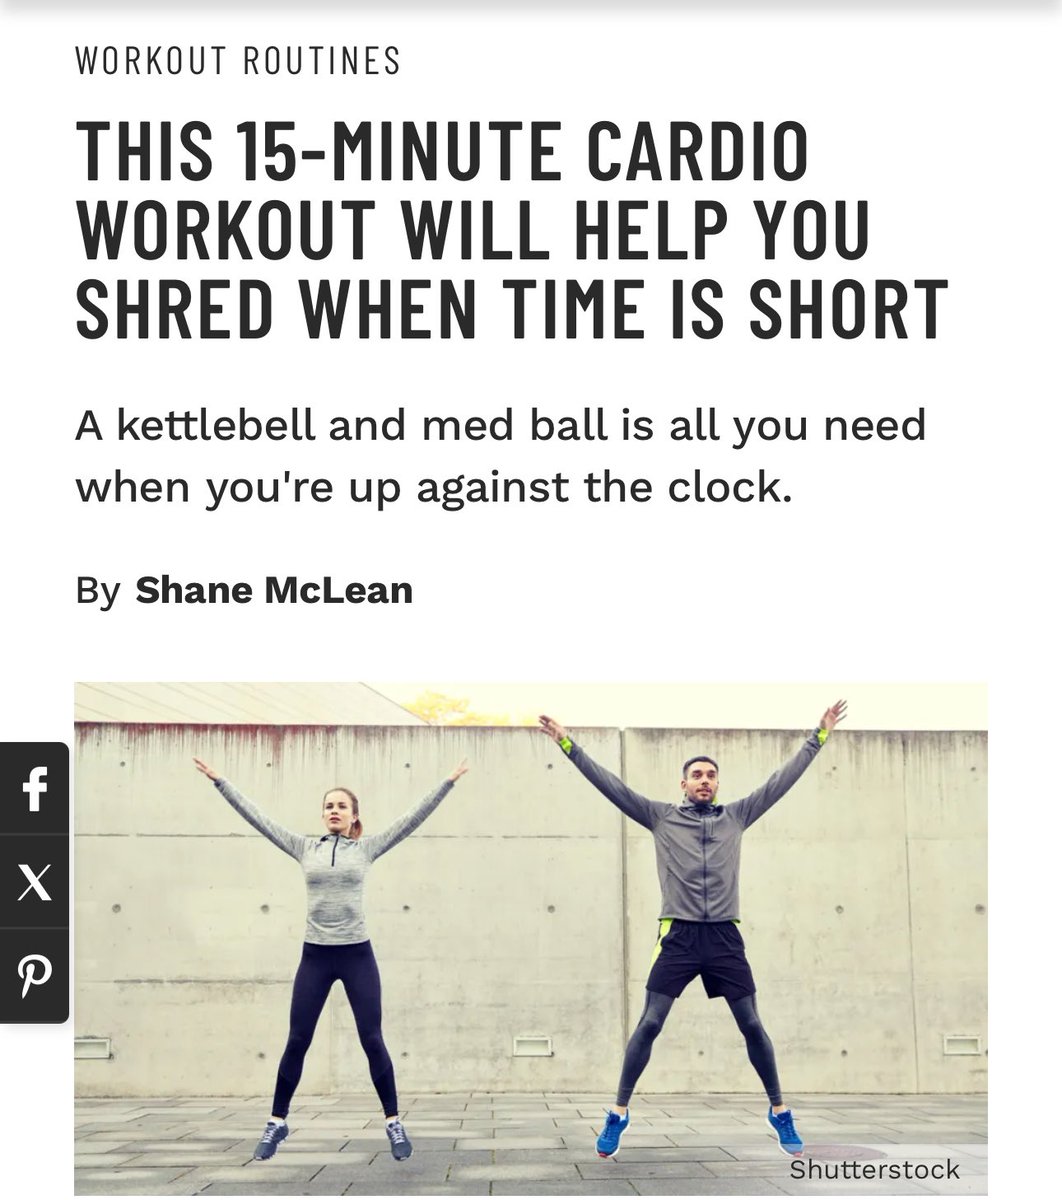 THIS 15-MINUTE CARDIO WORKOUT WILL HELP YOU SHRED WHEN TIME IS SHORT A kettlebell and med ball is all you need when you're up against the clock. By Shane McLean Read Article: muscleandfitness.com #cardio #cardioworkouts